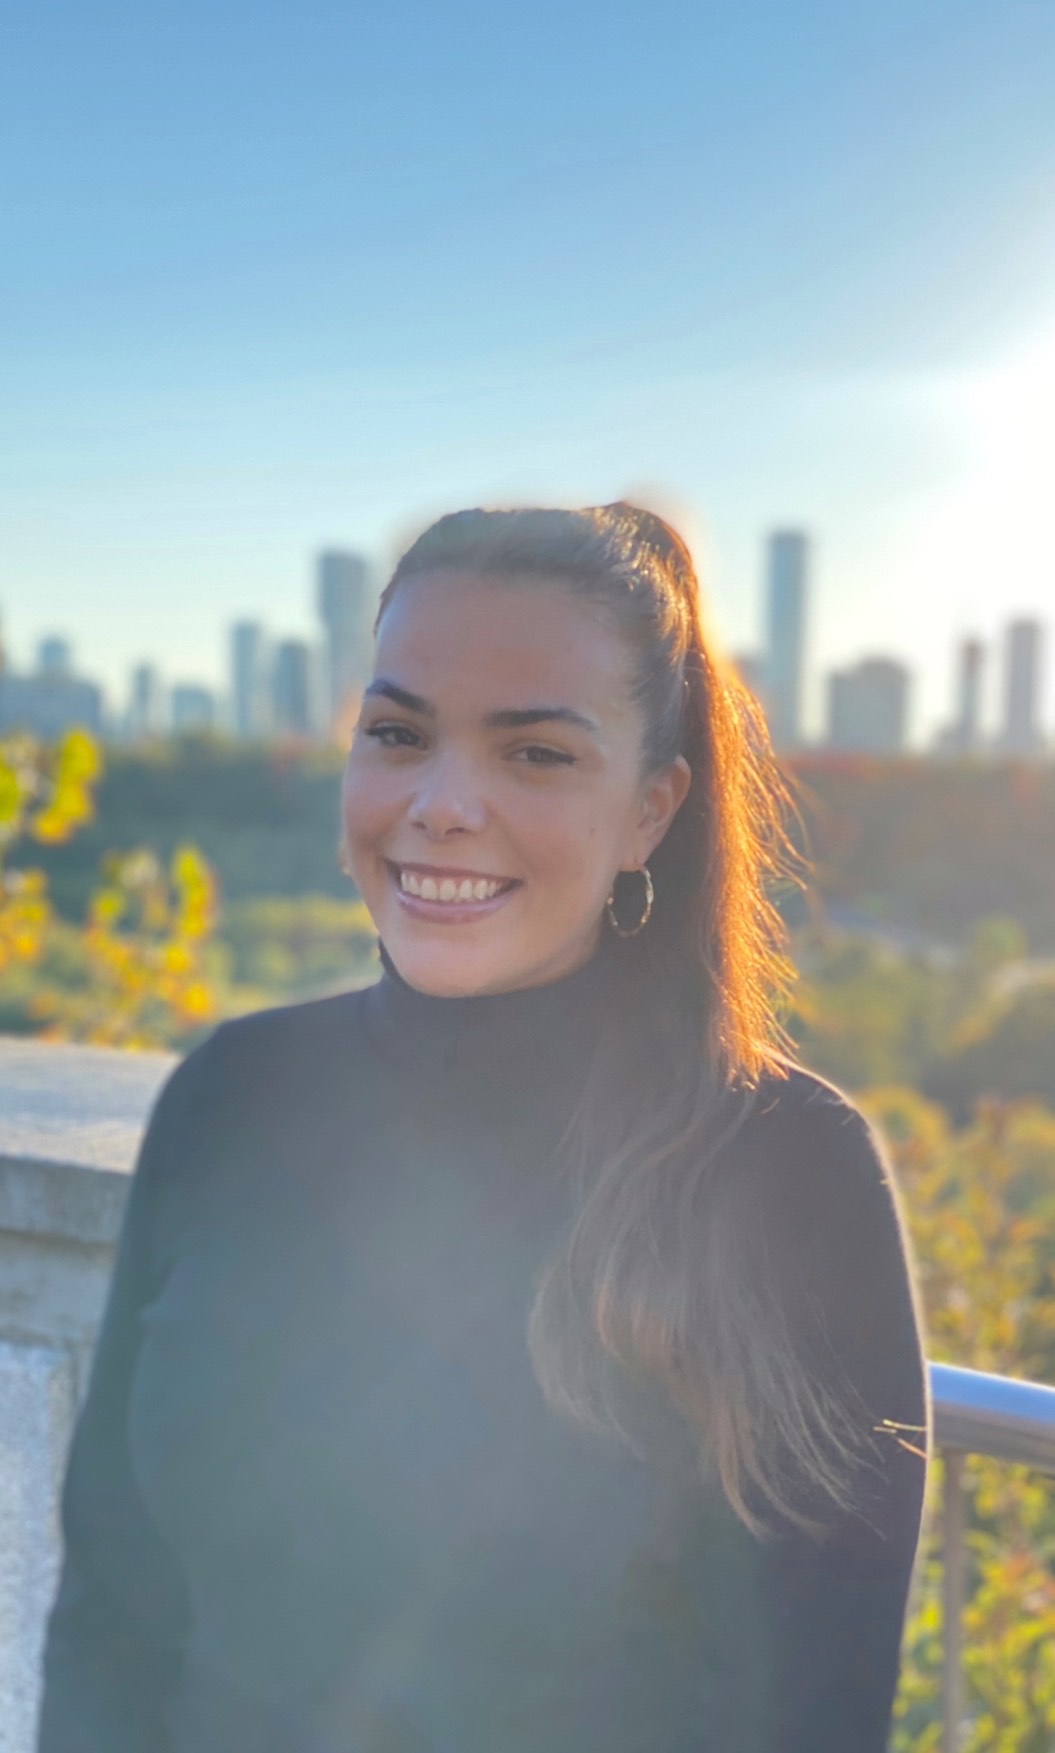 A portrait of a woman smiling, big city in the background